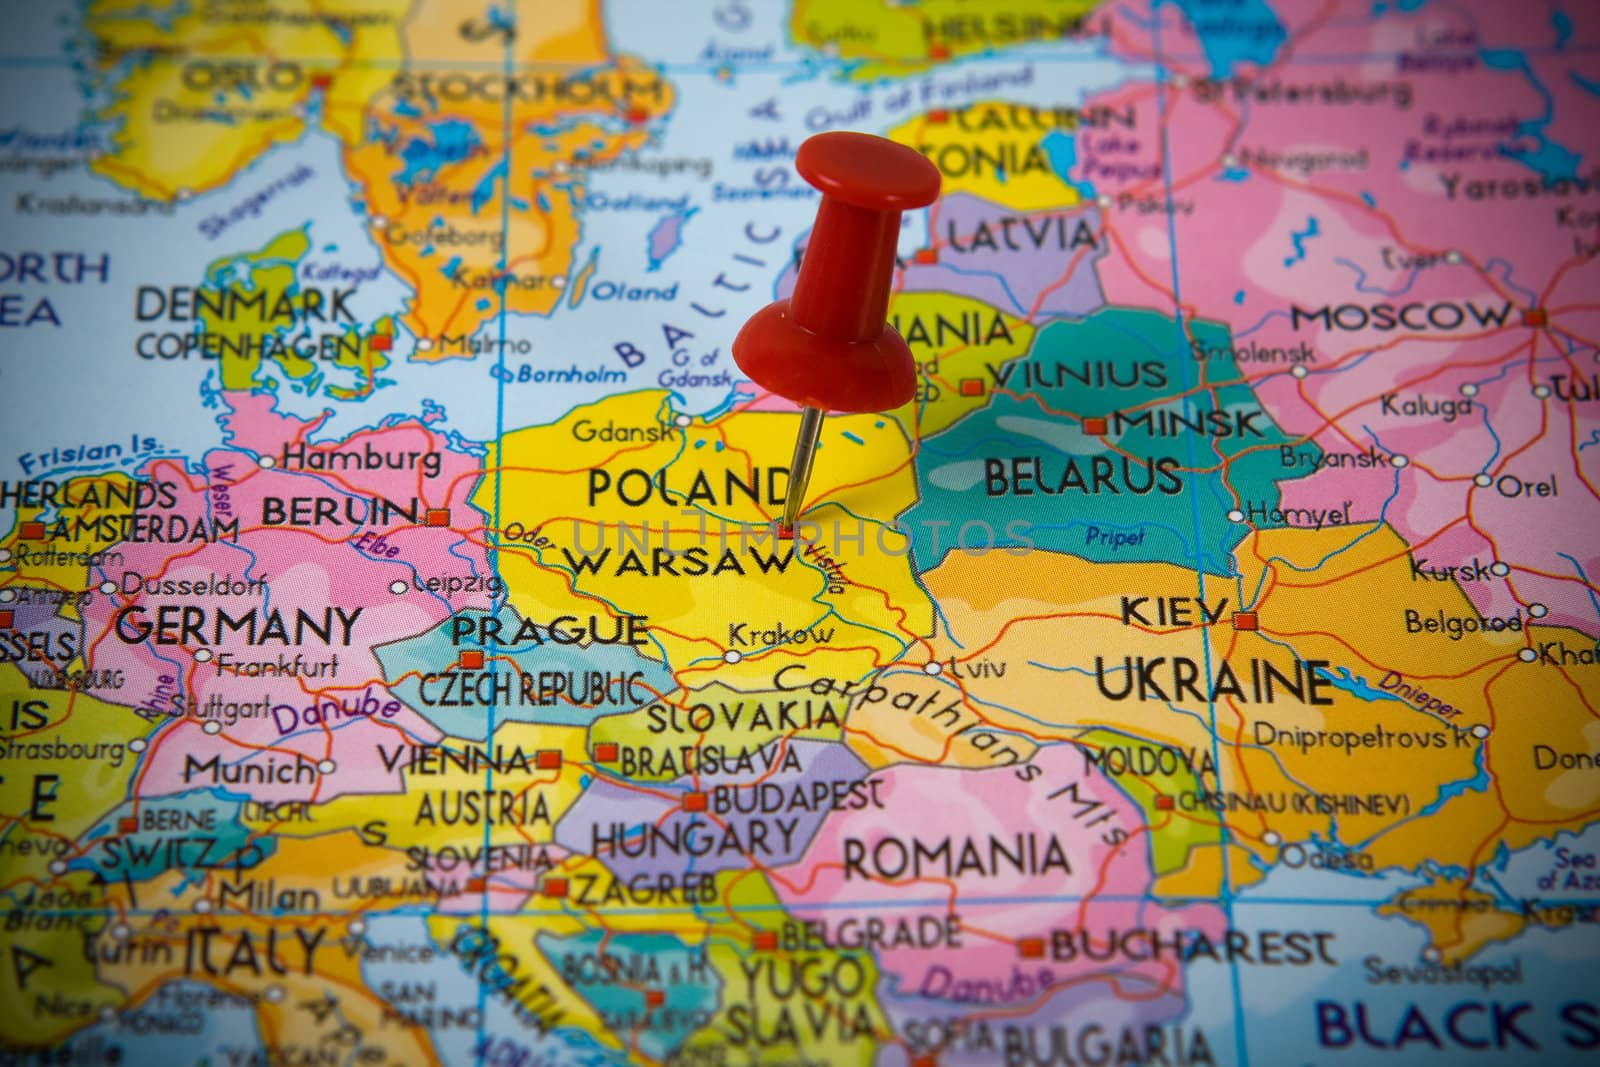 Small pin pointing on Warsaw (Poland)  in a map of Europe